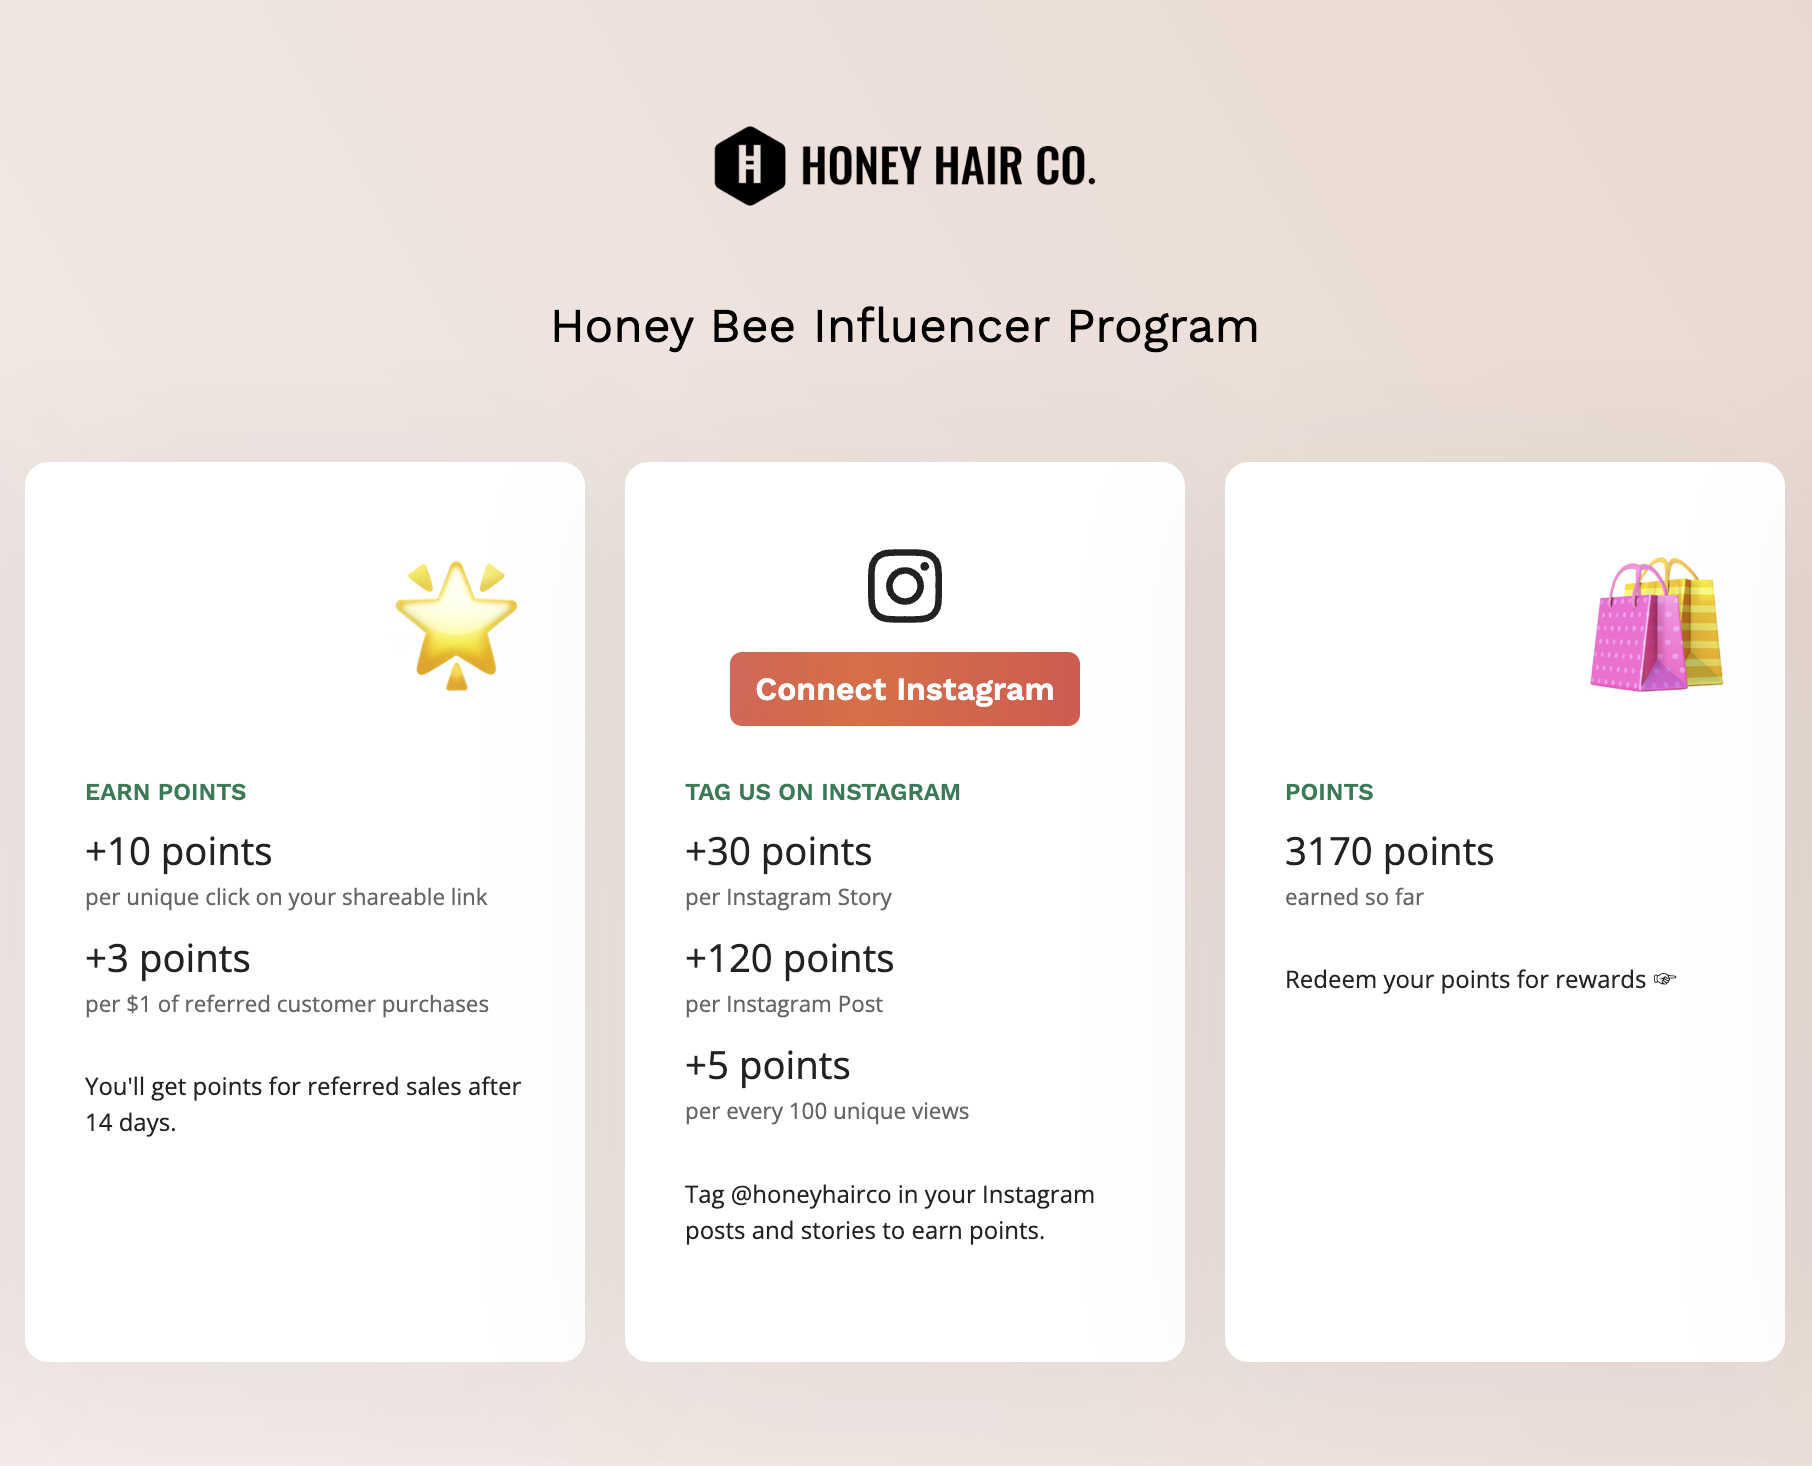 Acorn gives influencers a beautifully designed mobile portal with real-time tracking